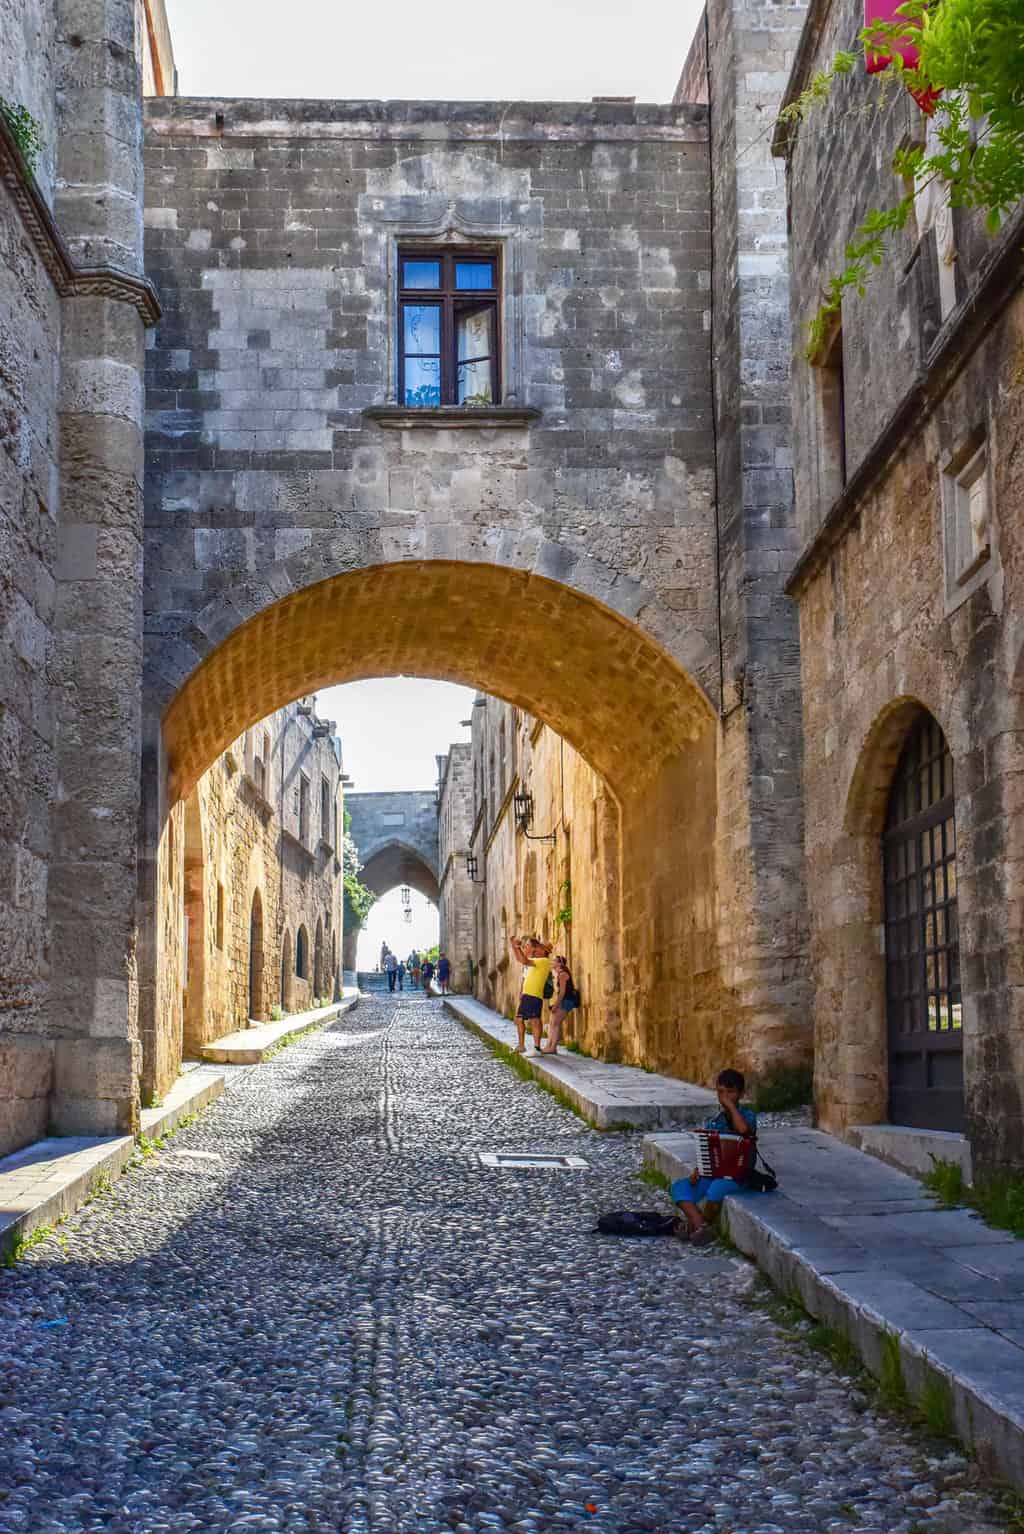 The cobbled streets of the Old Town in Rhodes with an archway over the street. Tourists are taking photos on the side of the street and a young boy with an accordion sits on the side of the road.  